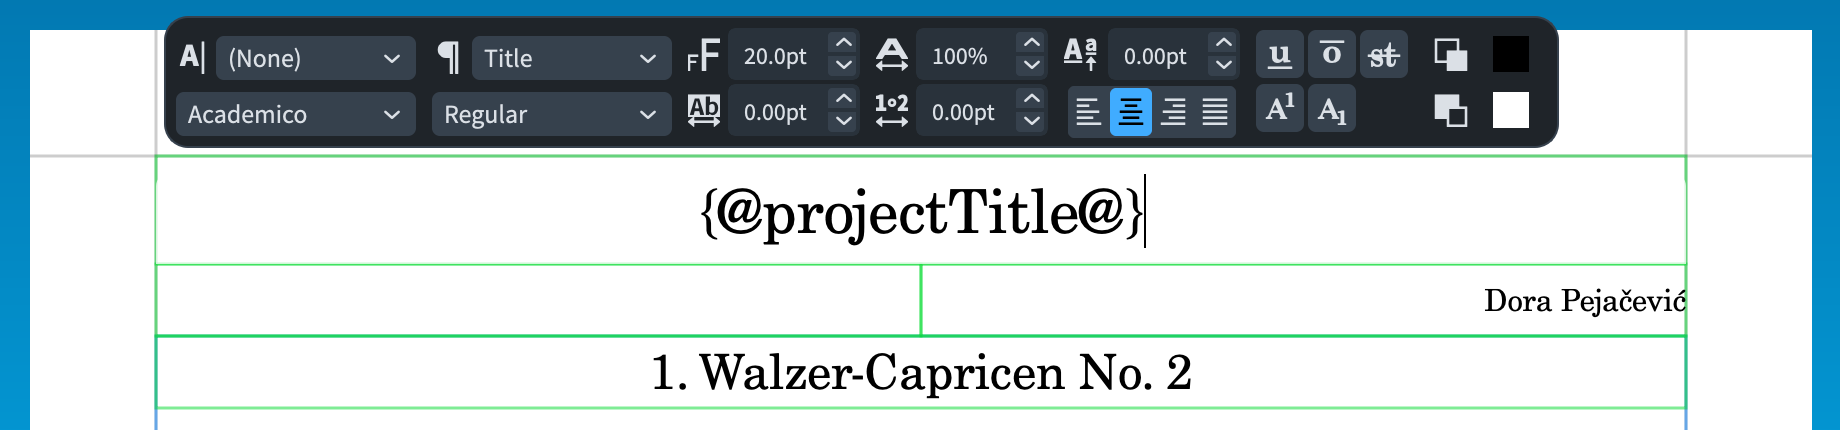 Project title token, part of the First page template